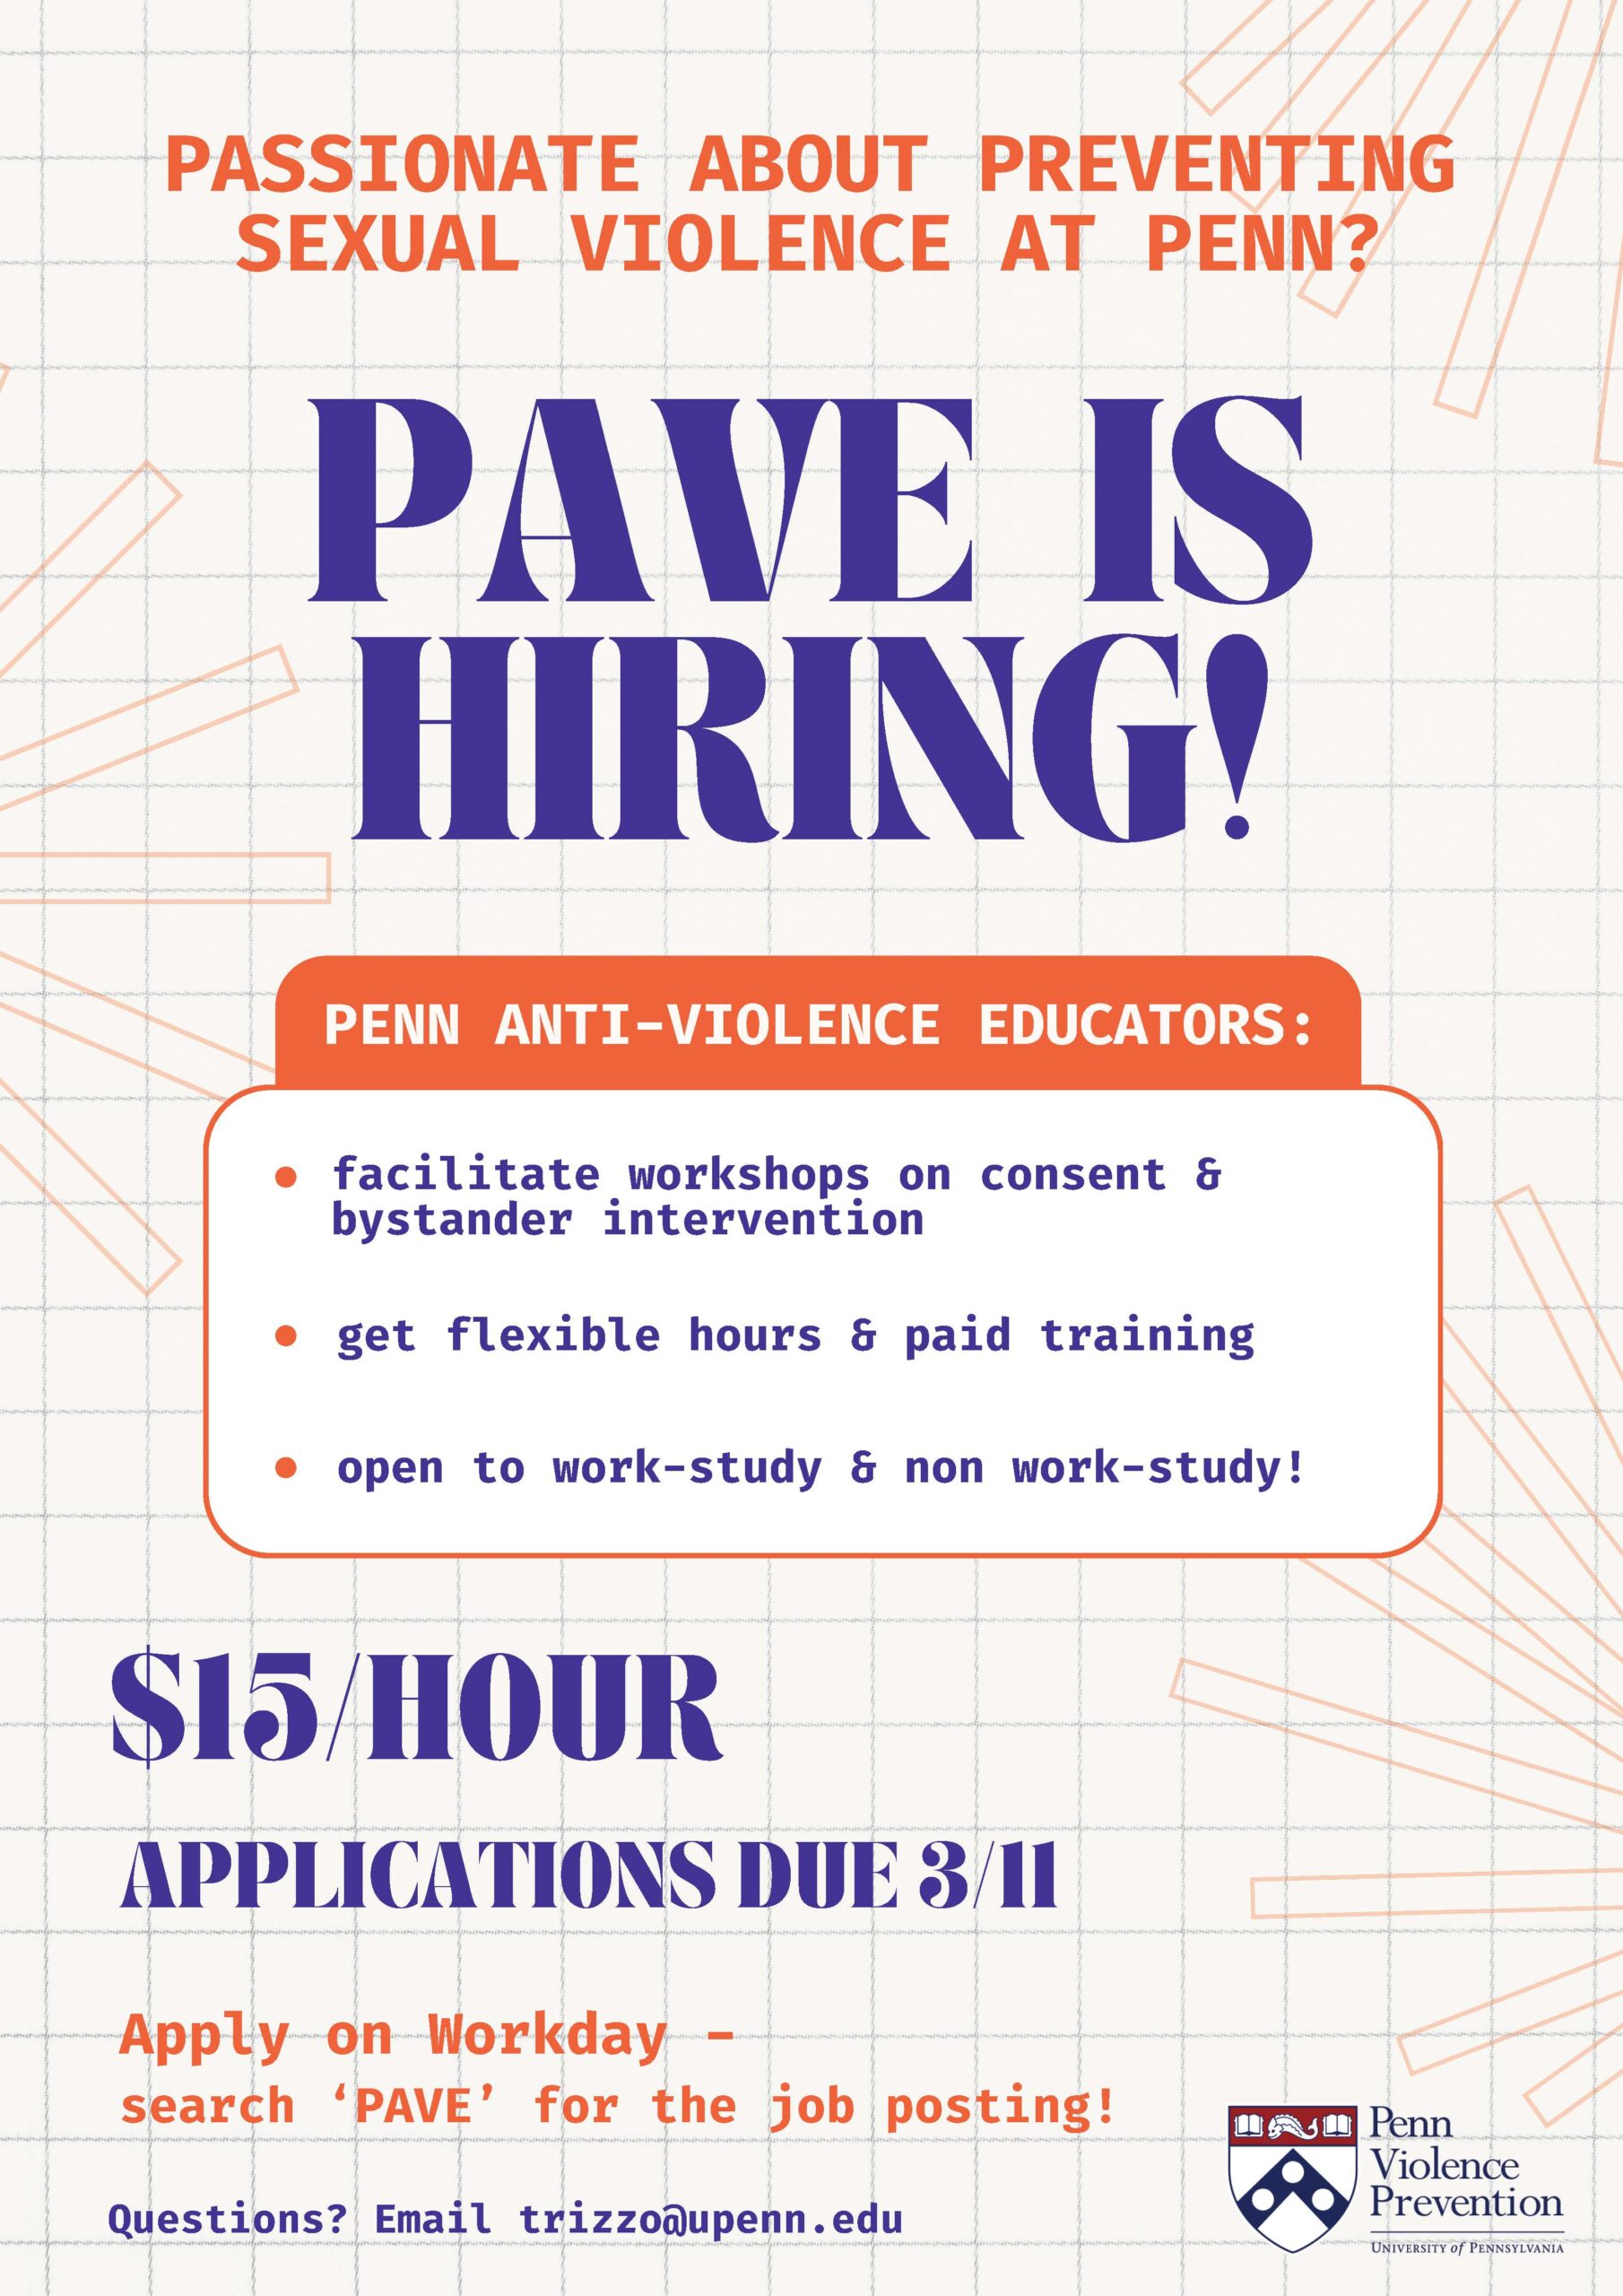 PAVE hiring flyer featuring details about PAVE and payment.